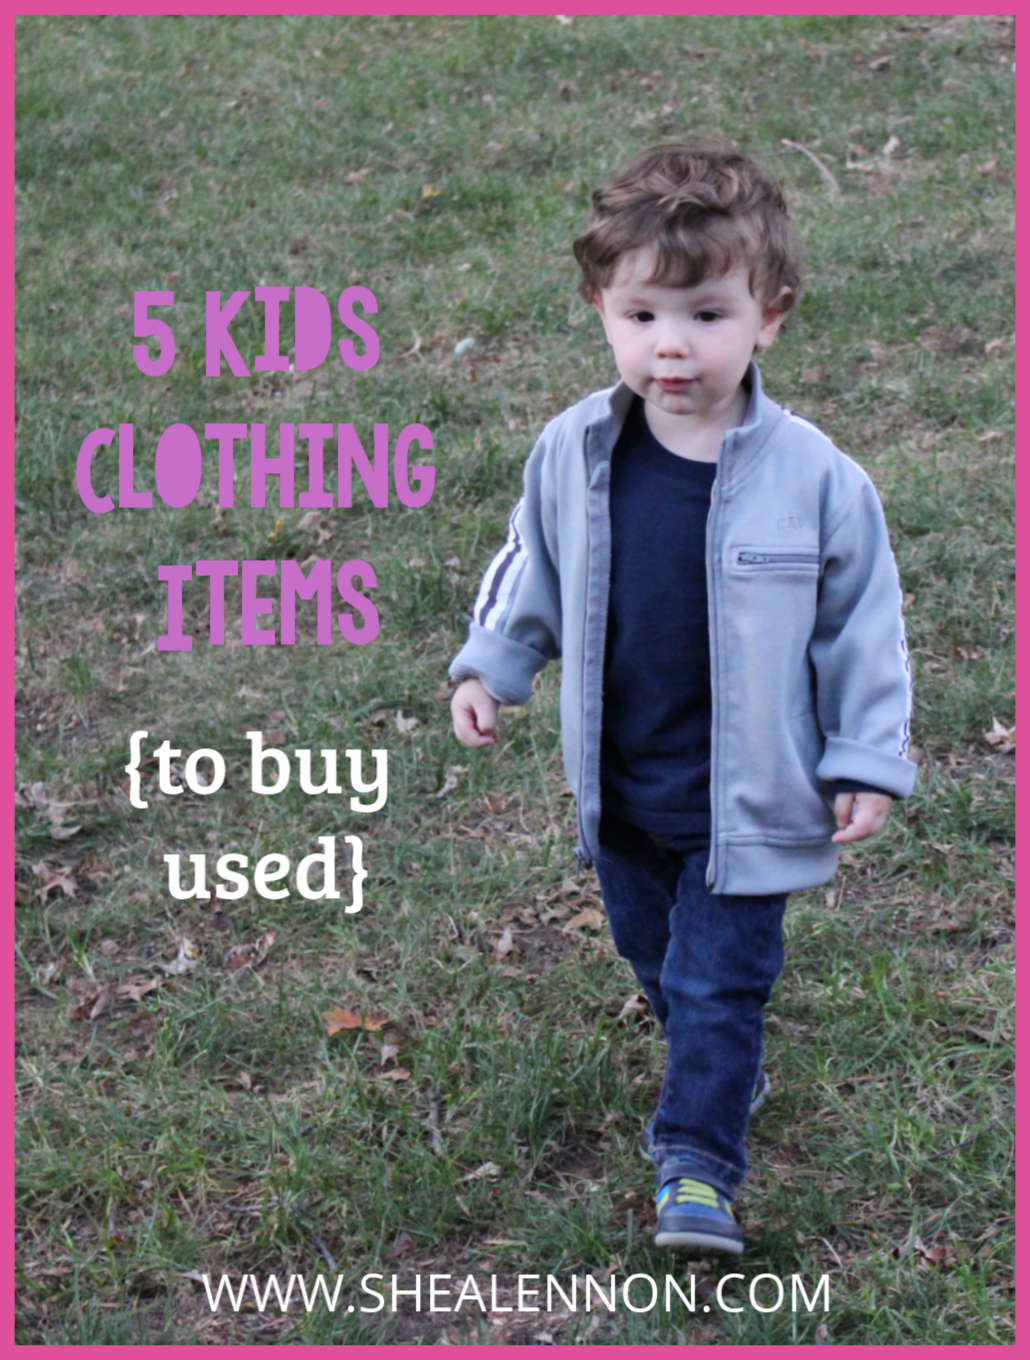 5 kids clothing items that are great to buy used